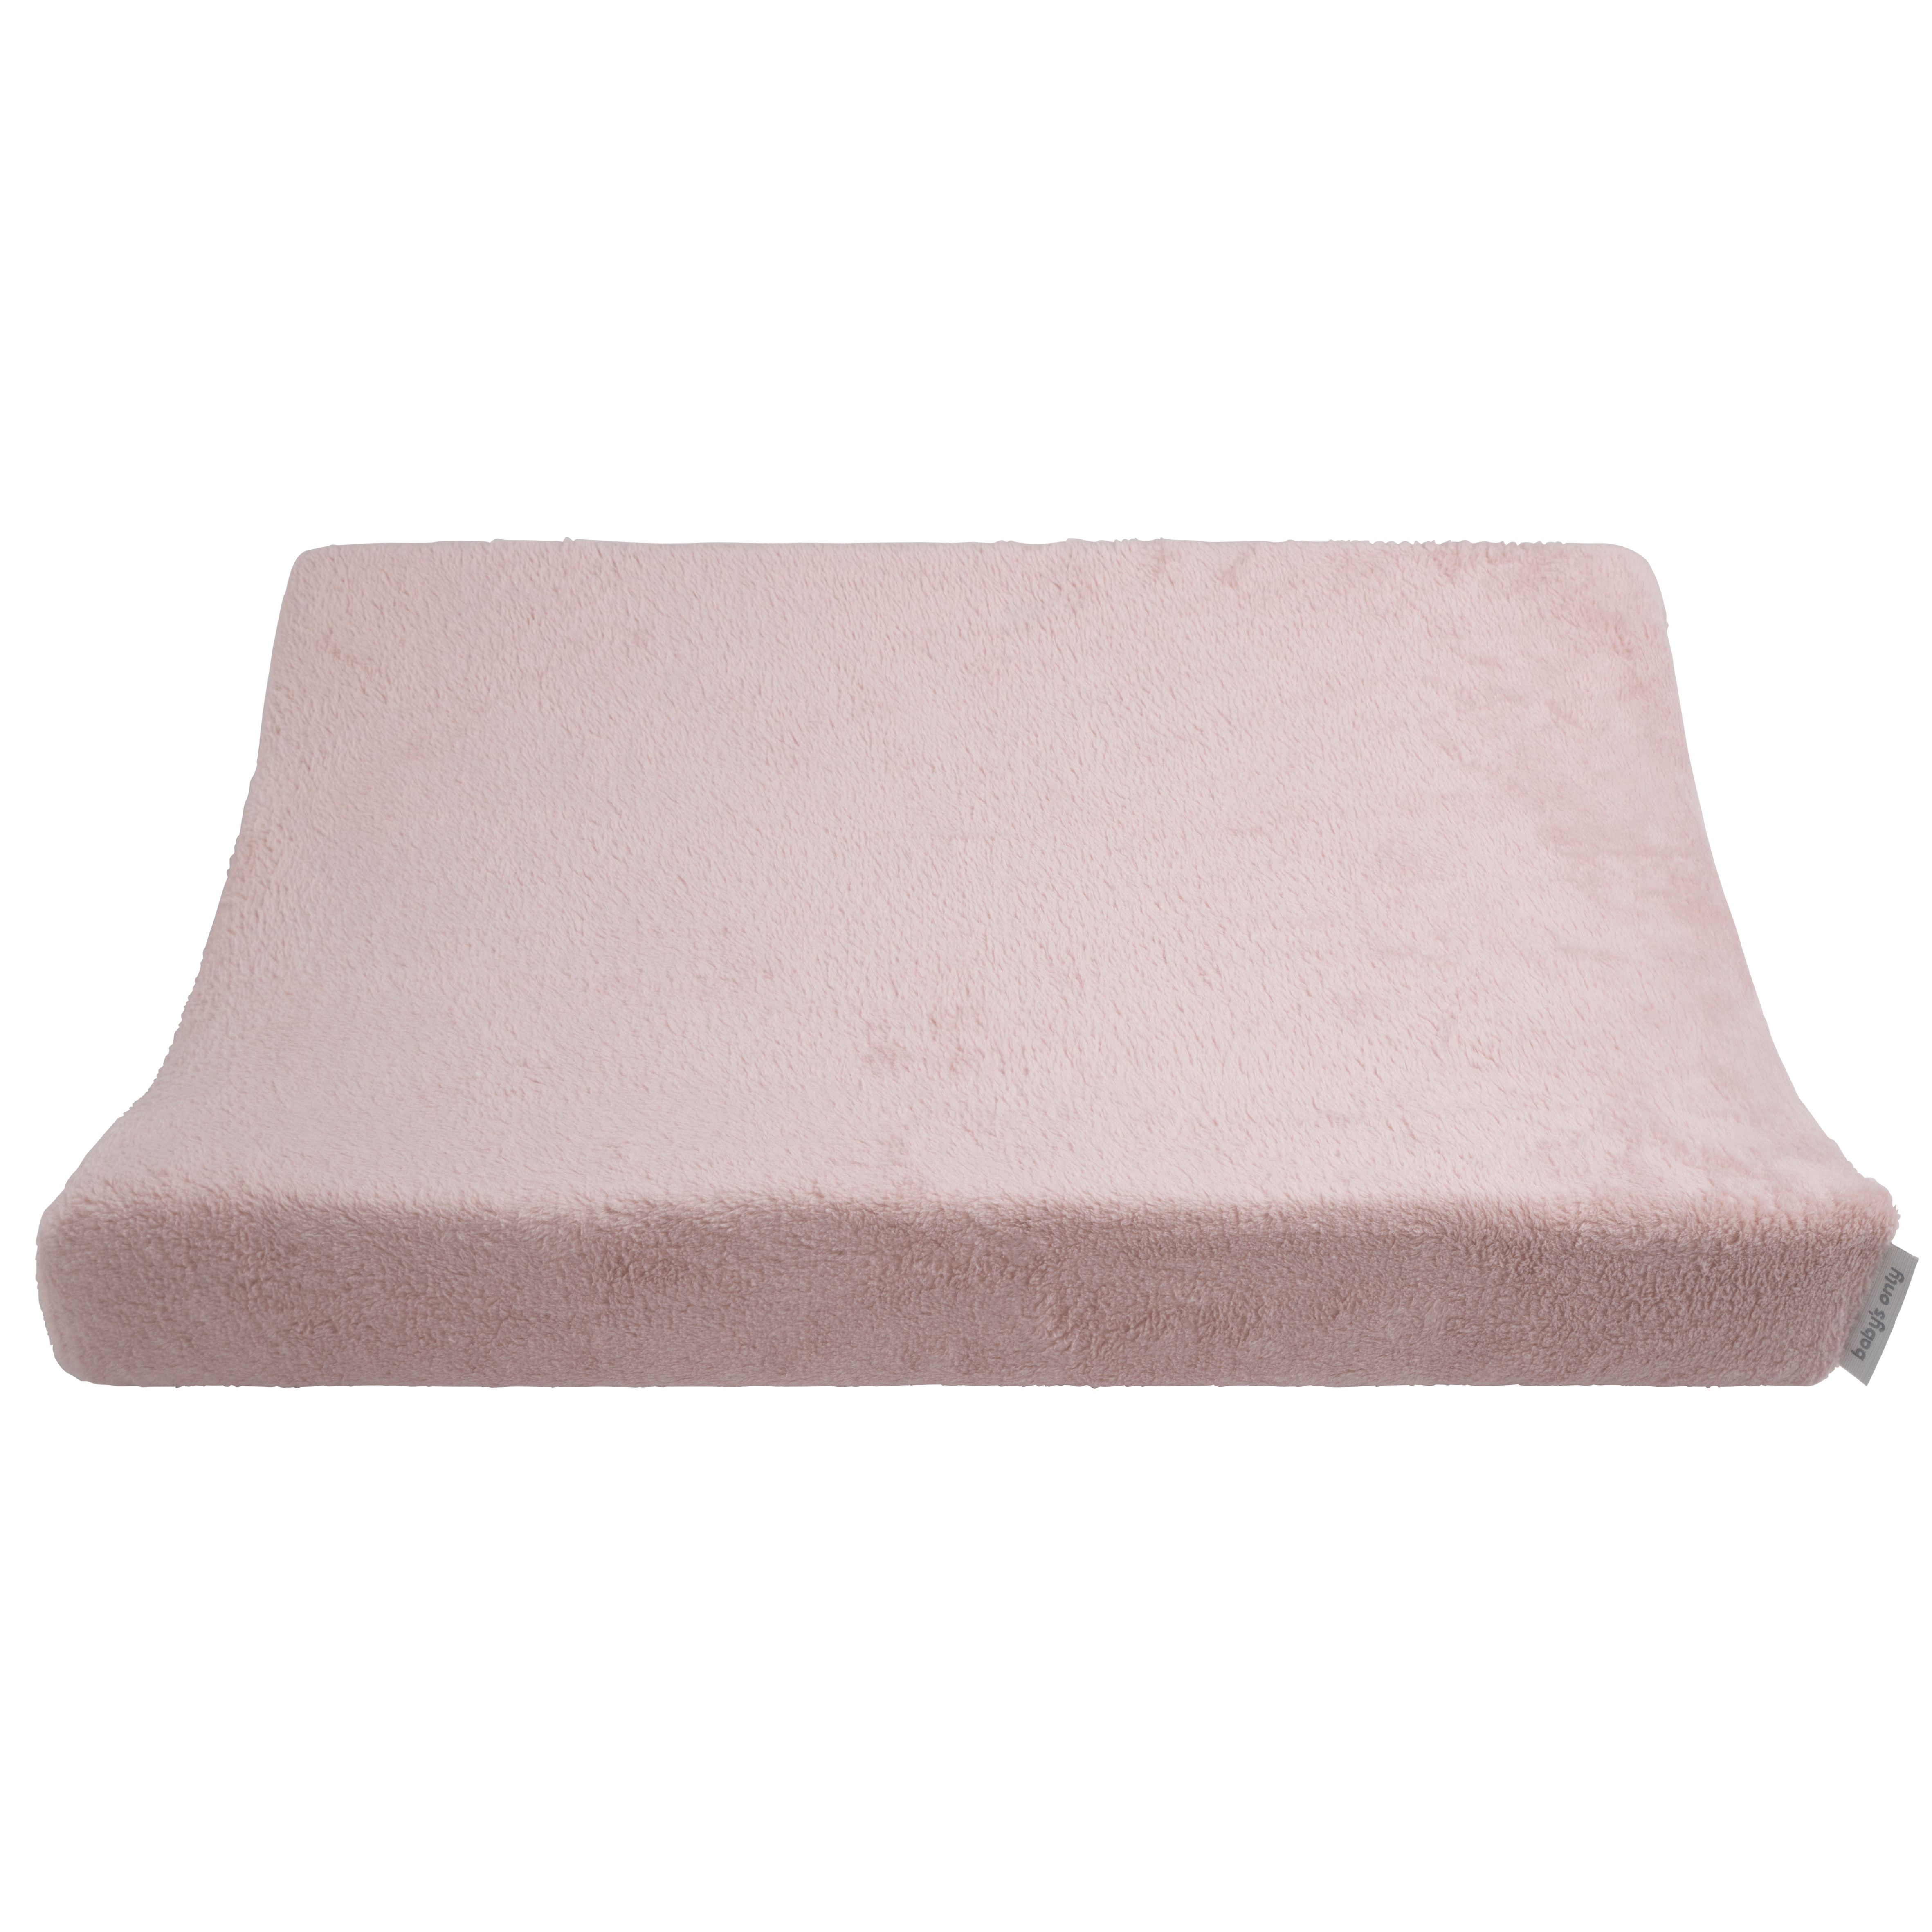 Changing pad cover Cozy old pink - 45x70